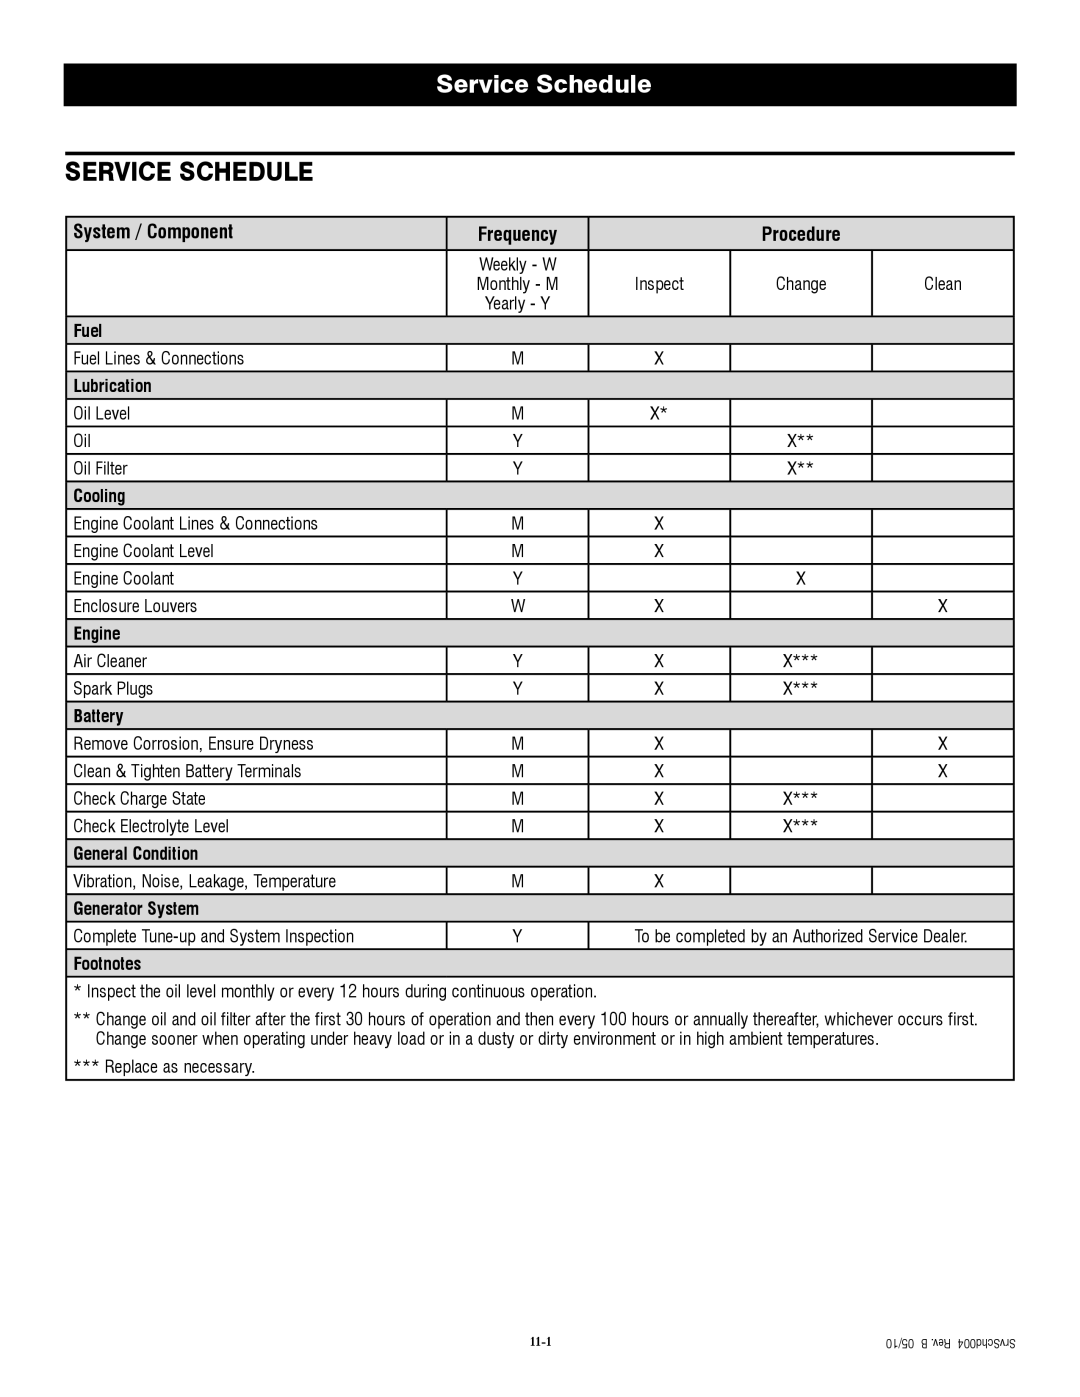 Generac QT04524ANSX owner manual Service Schedule, System / Component, Frequency, Procedure 